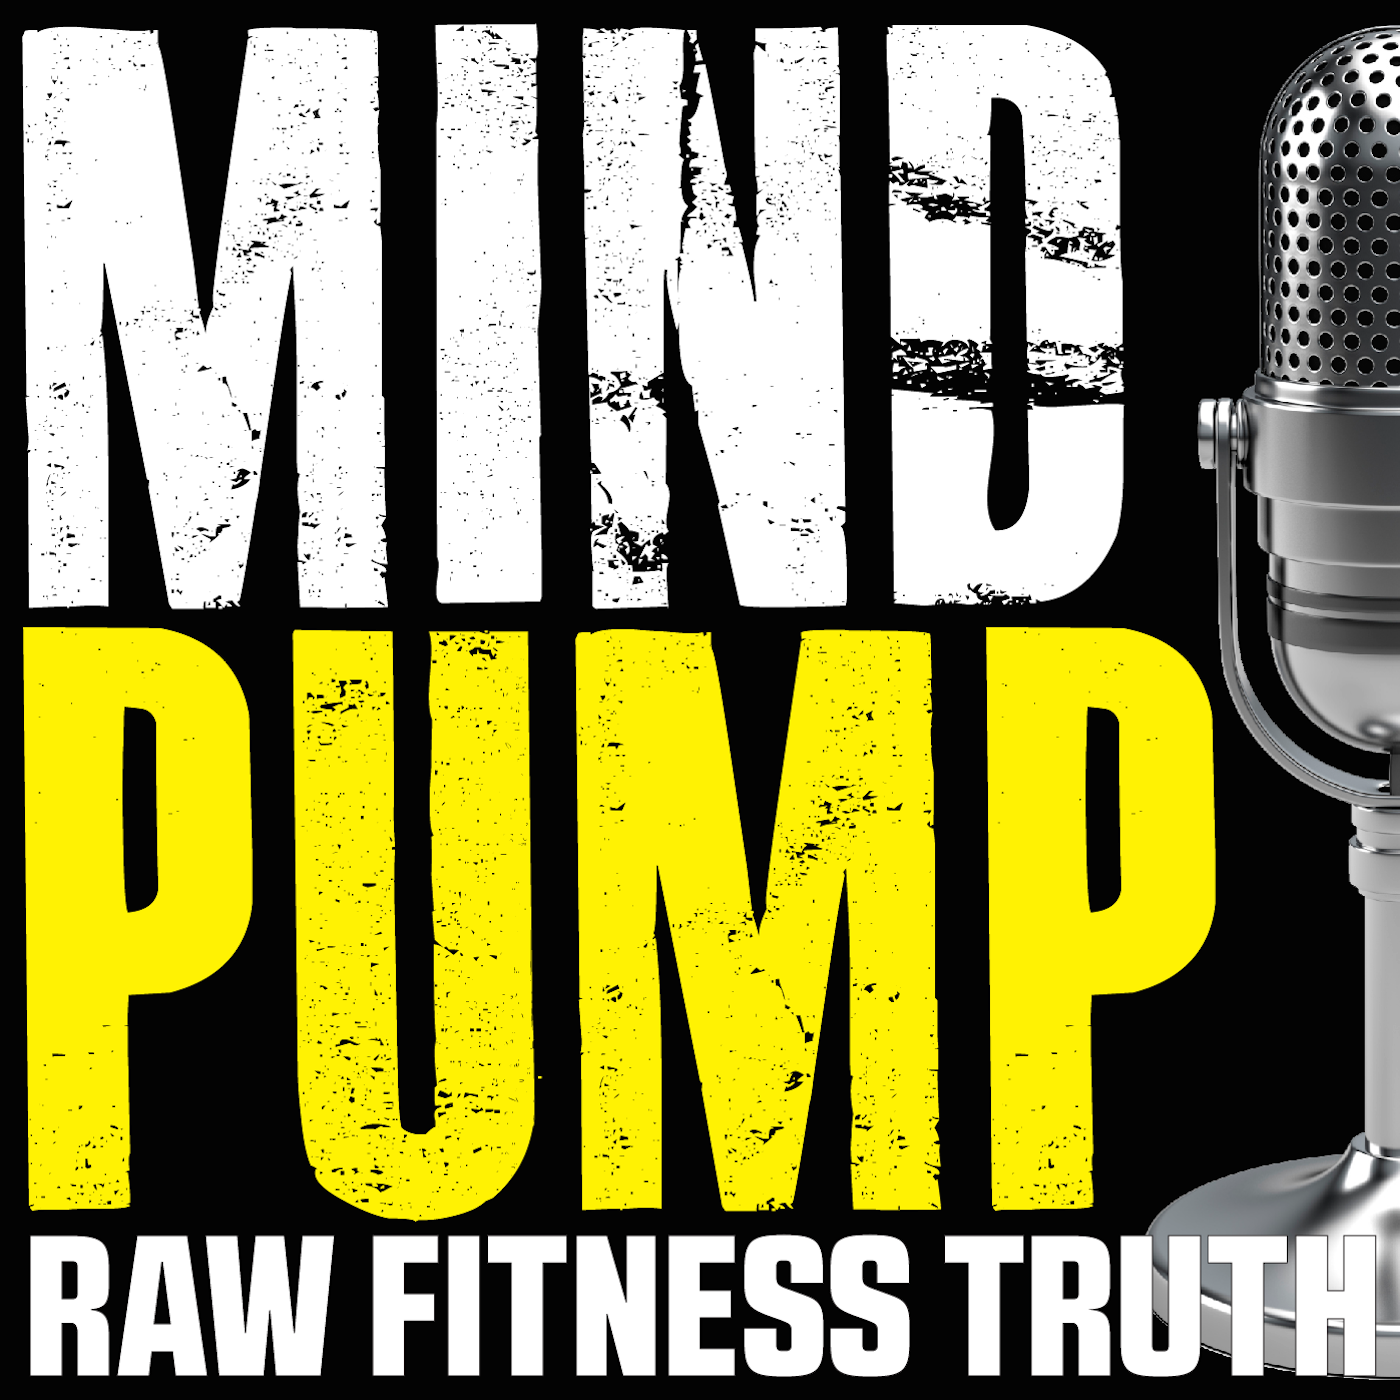 076: NEAT for Fat Loss, 7 Deadly Sins & Female Pick-Up Tips